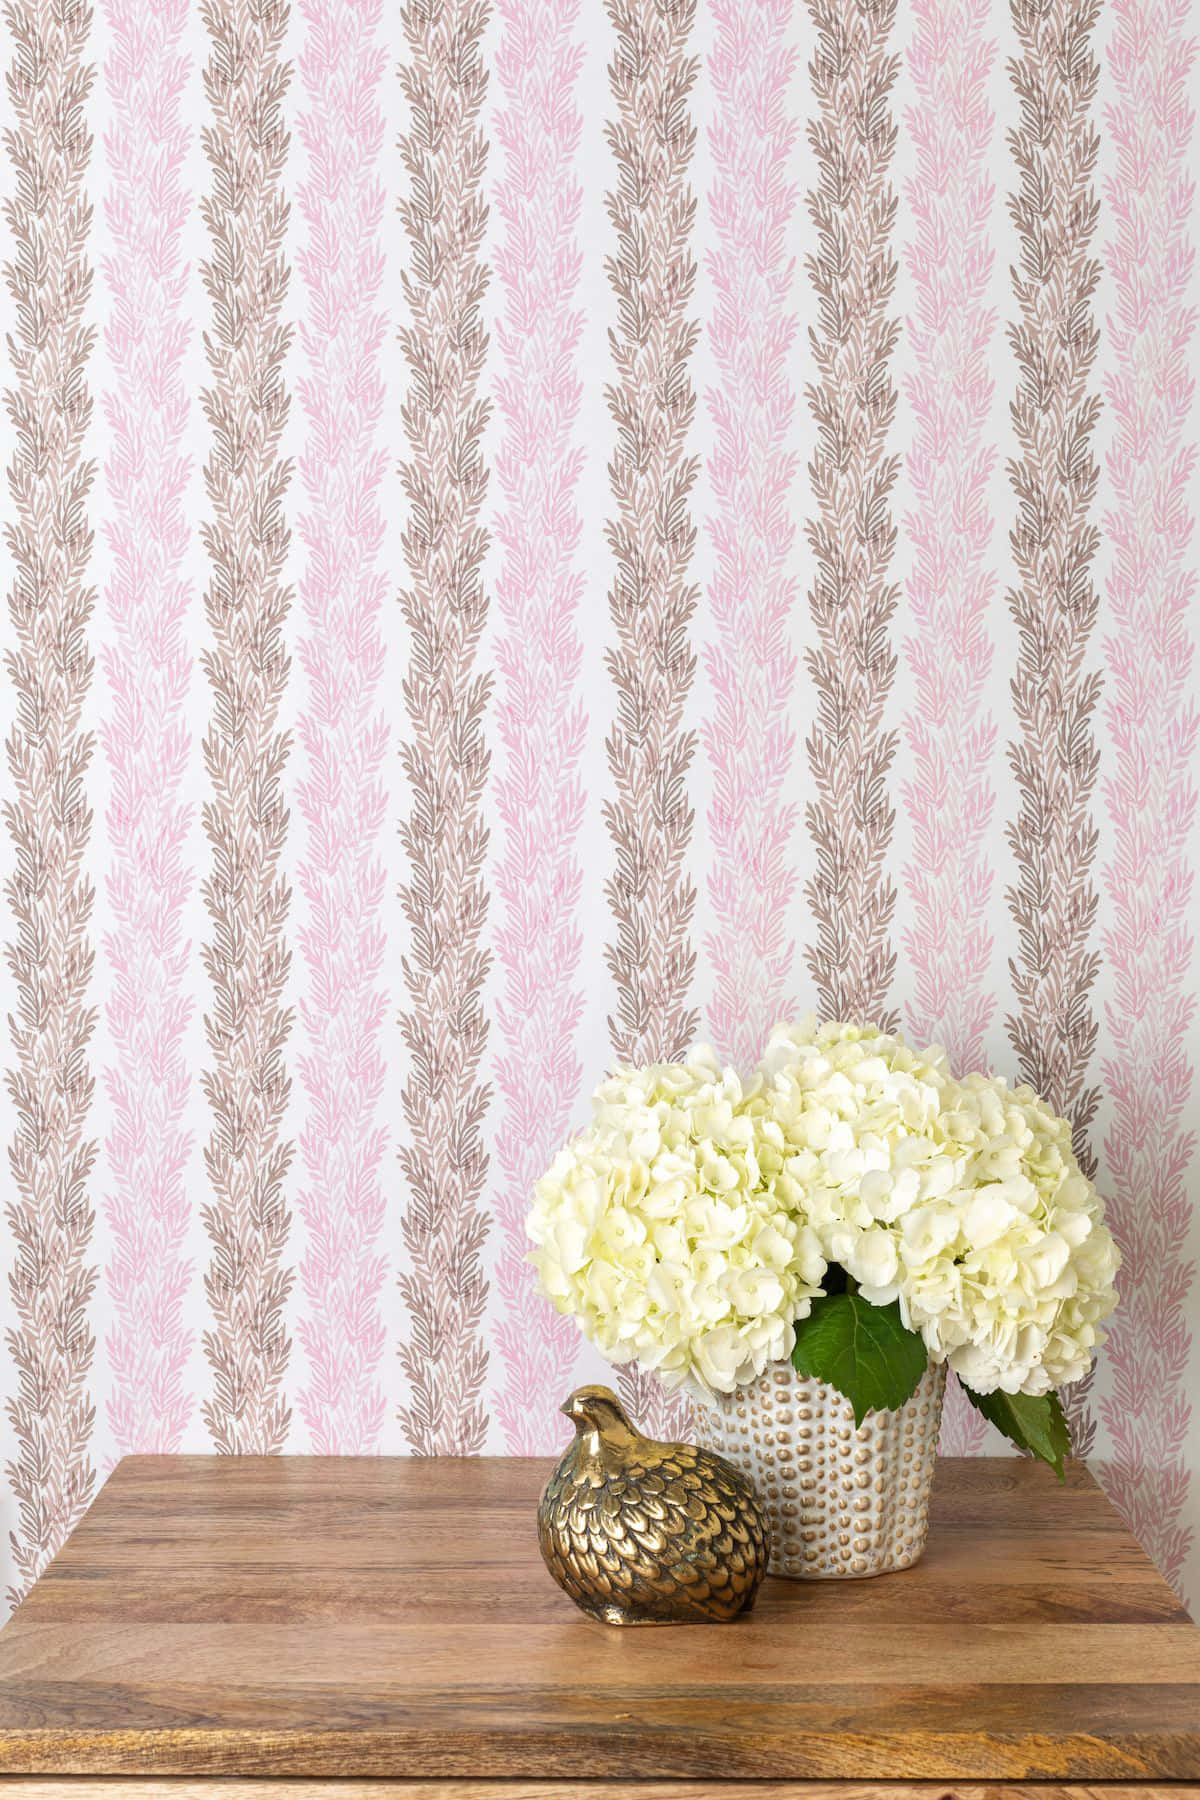 A Pink And Brown Wallpaper With A Vase Of Flowers Wallpaper